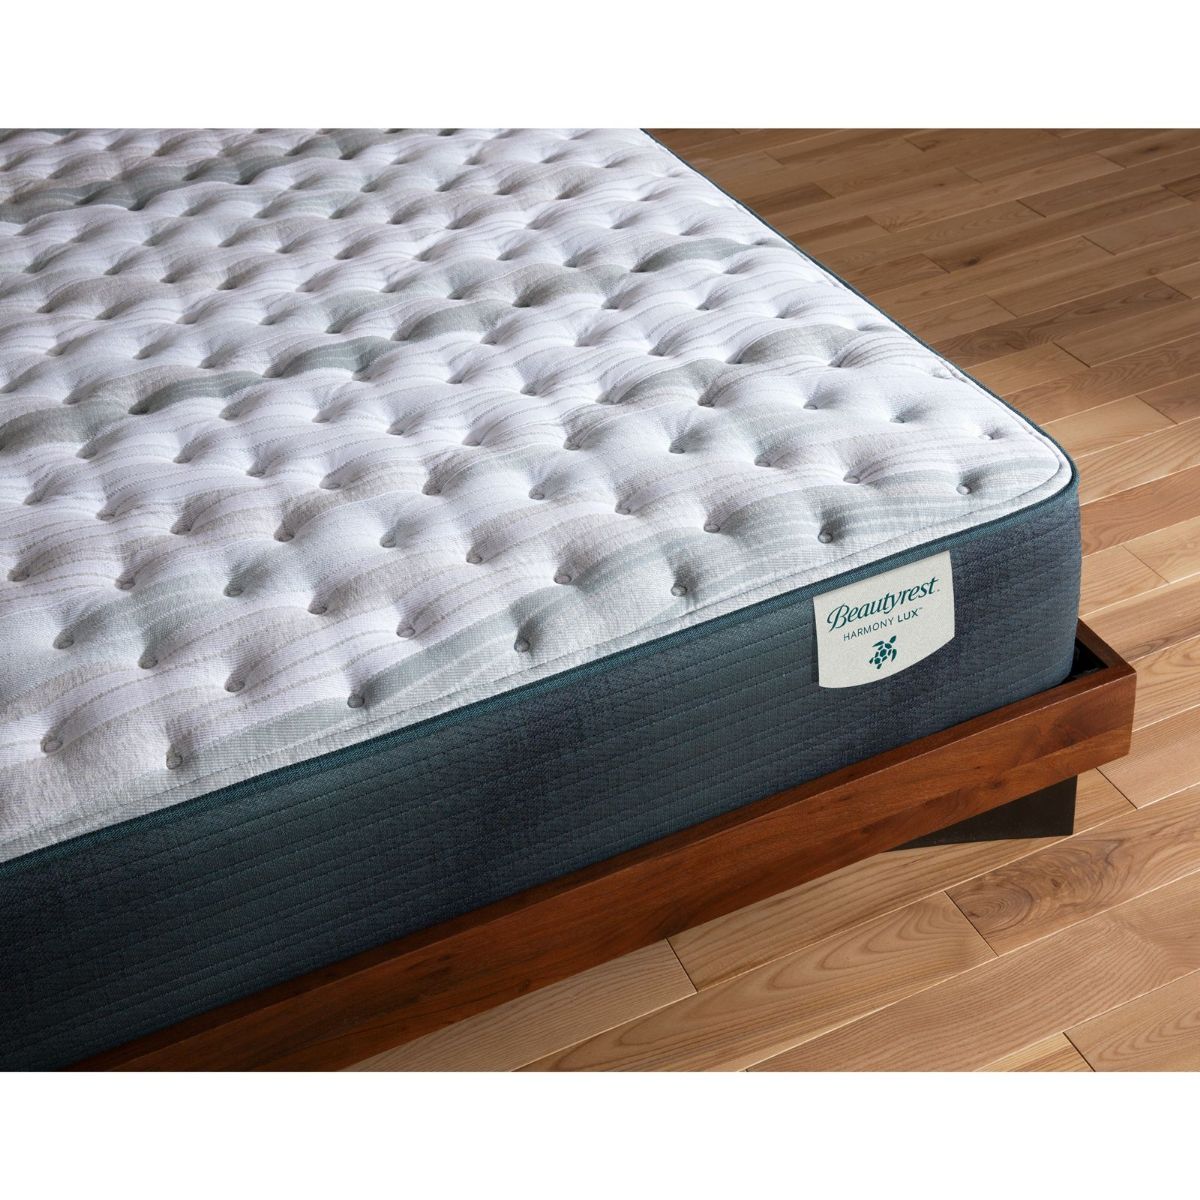 Picture of Katherine Bay Firm Full Mattress